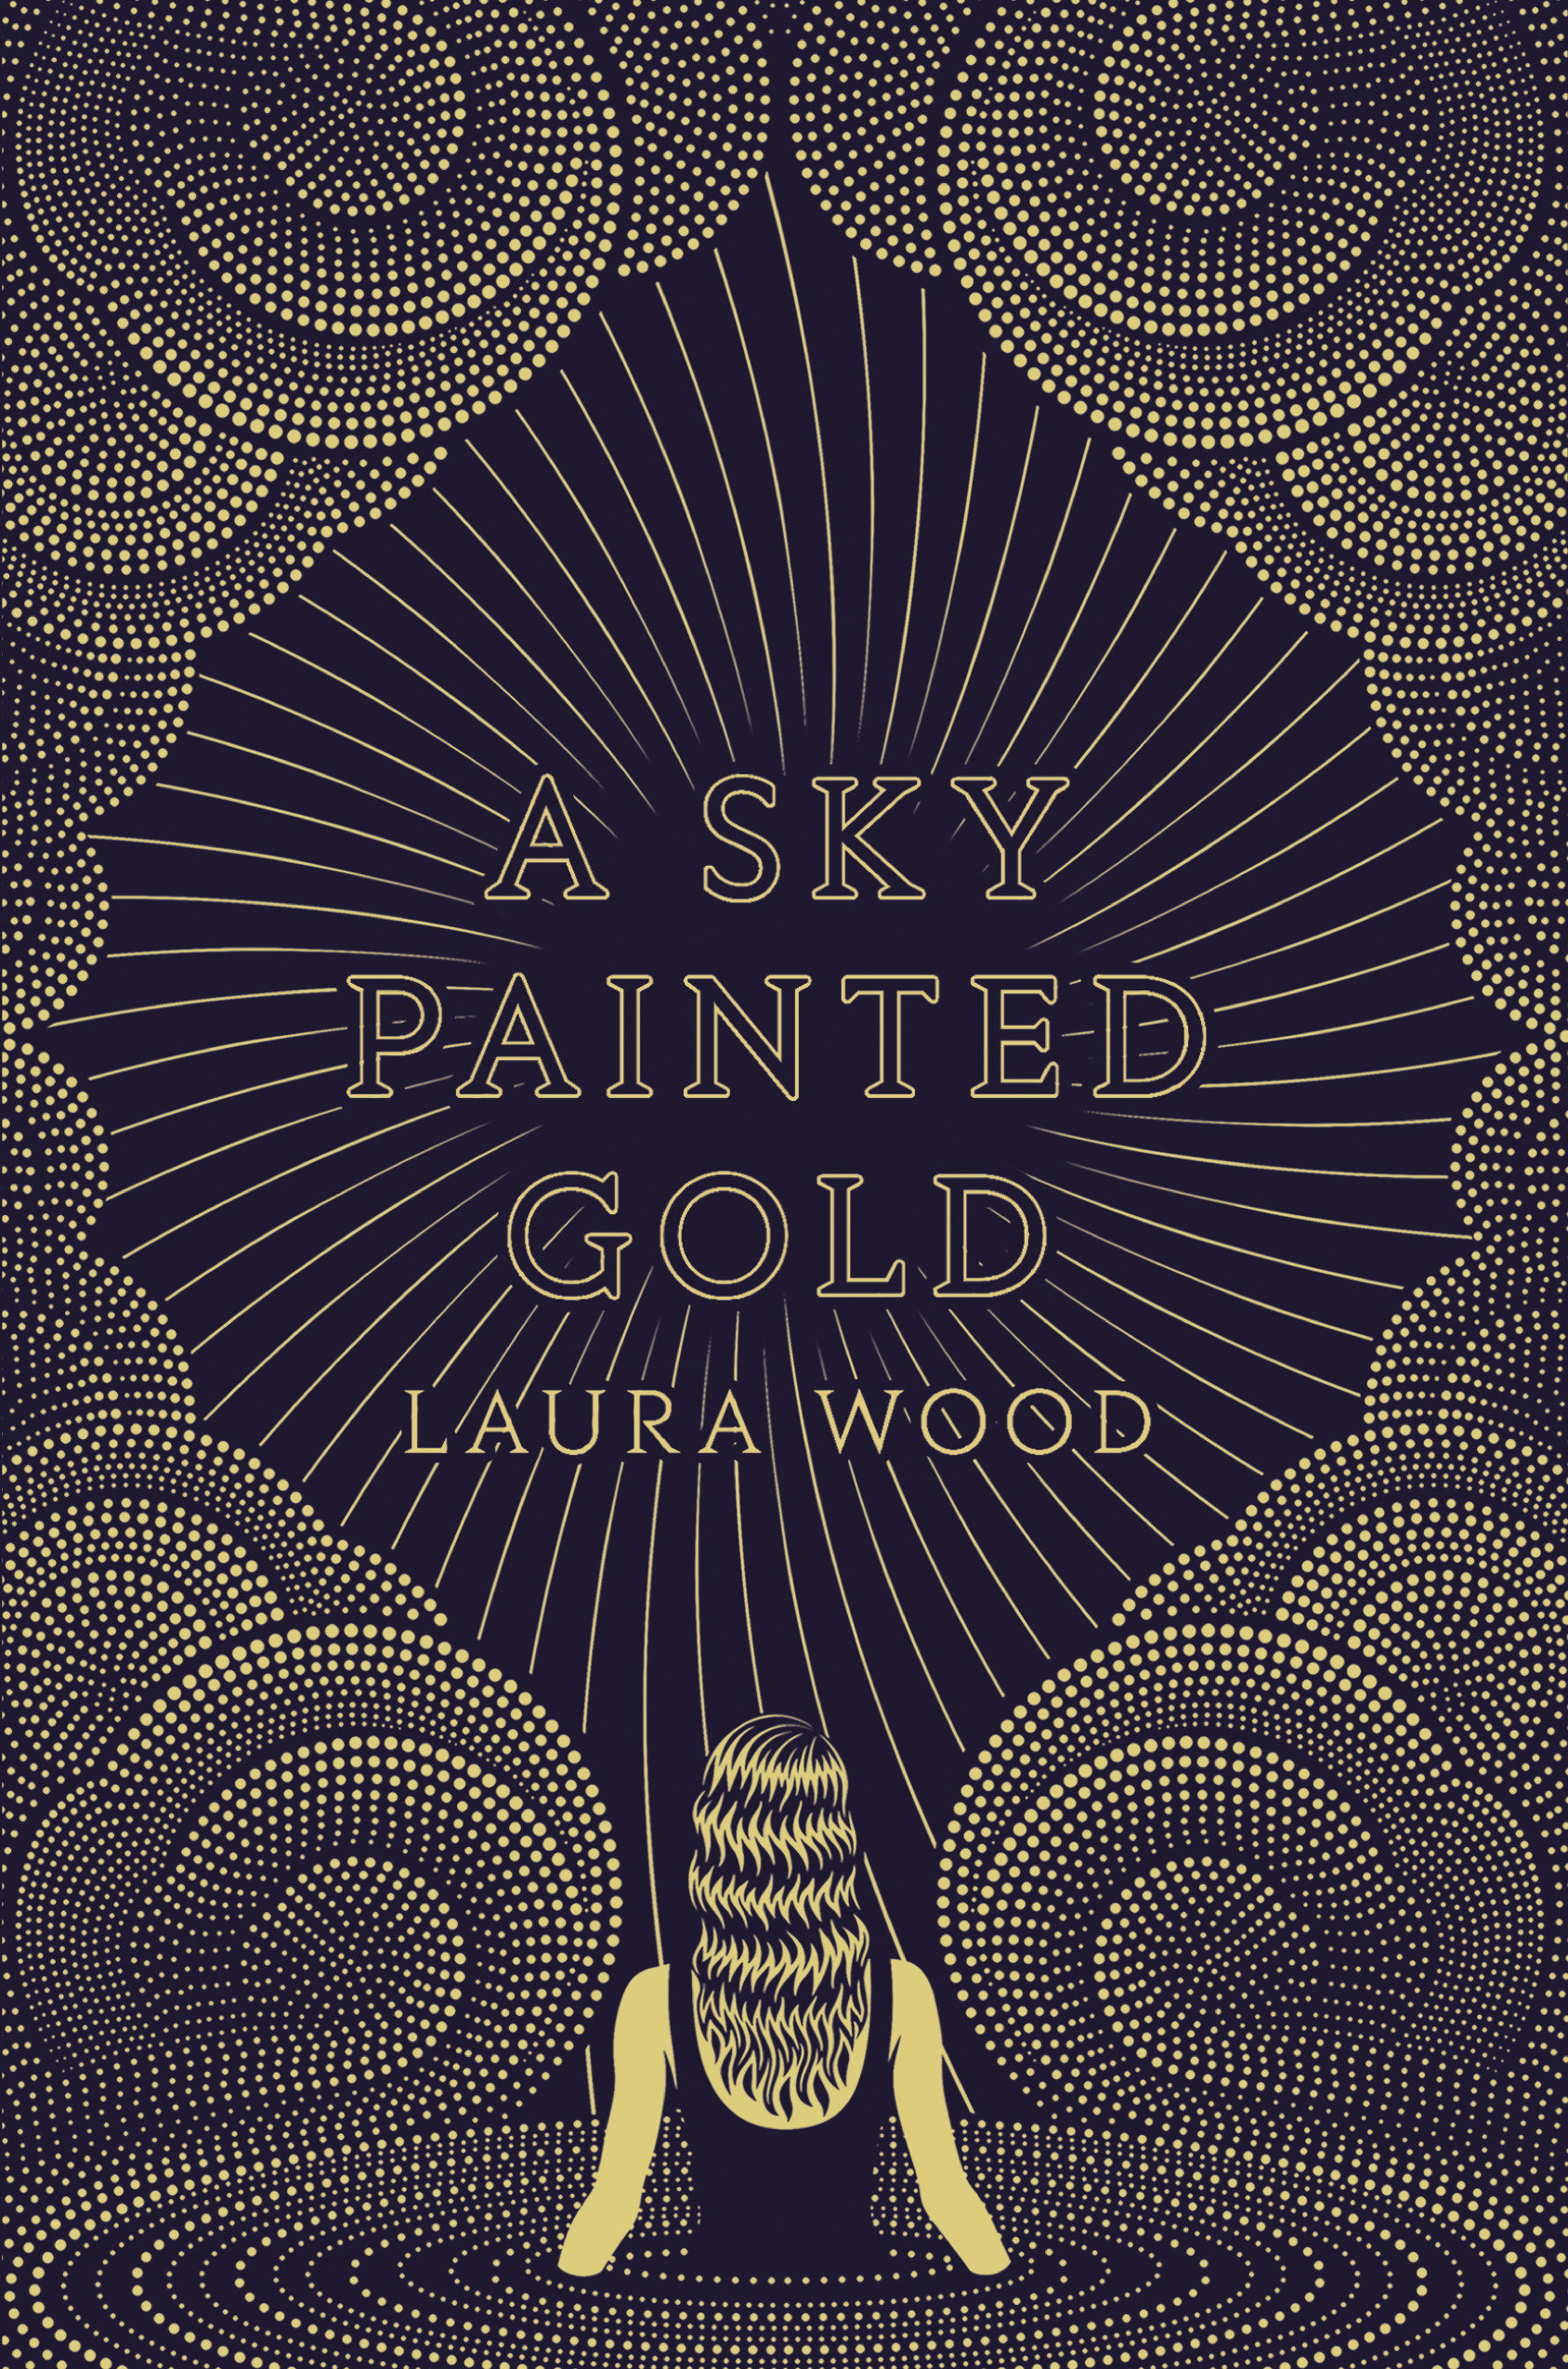 A Sky Painted Gold (Hardcover Book)